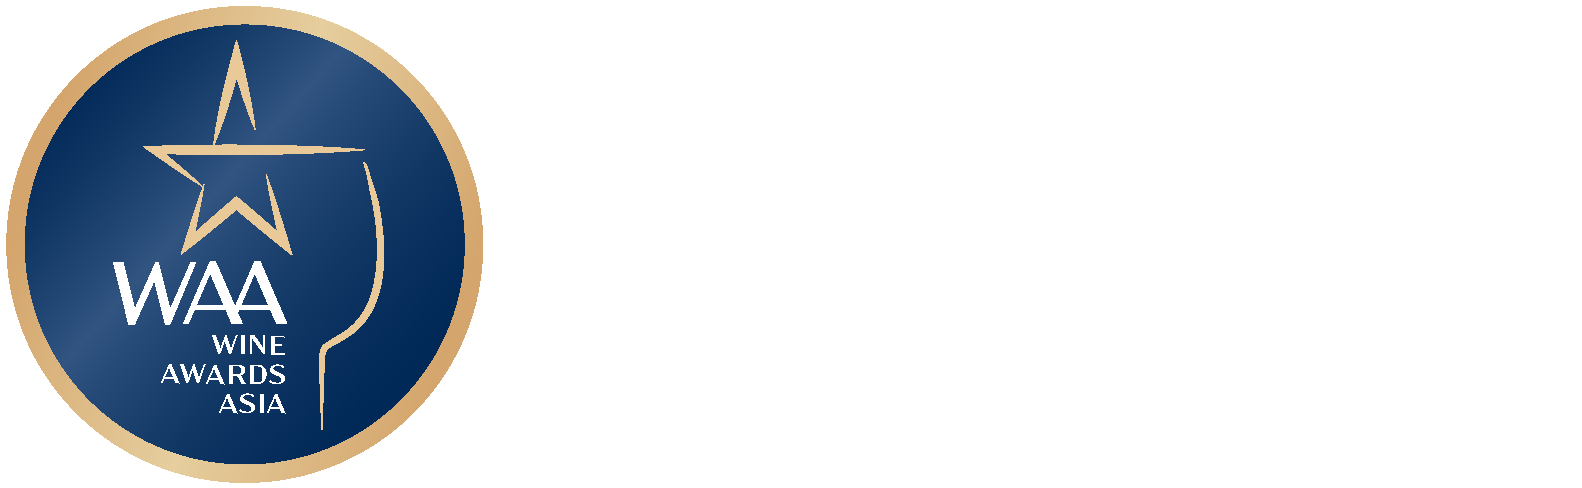 Wine Awards Asia - Wine Award to Connect Buyers in Asia